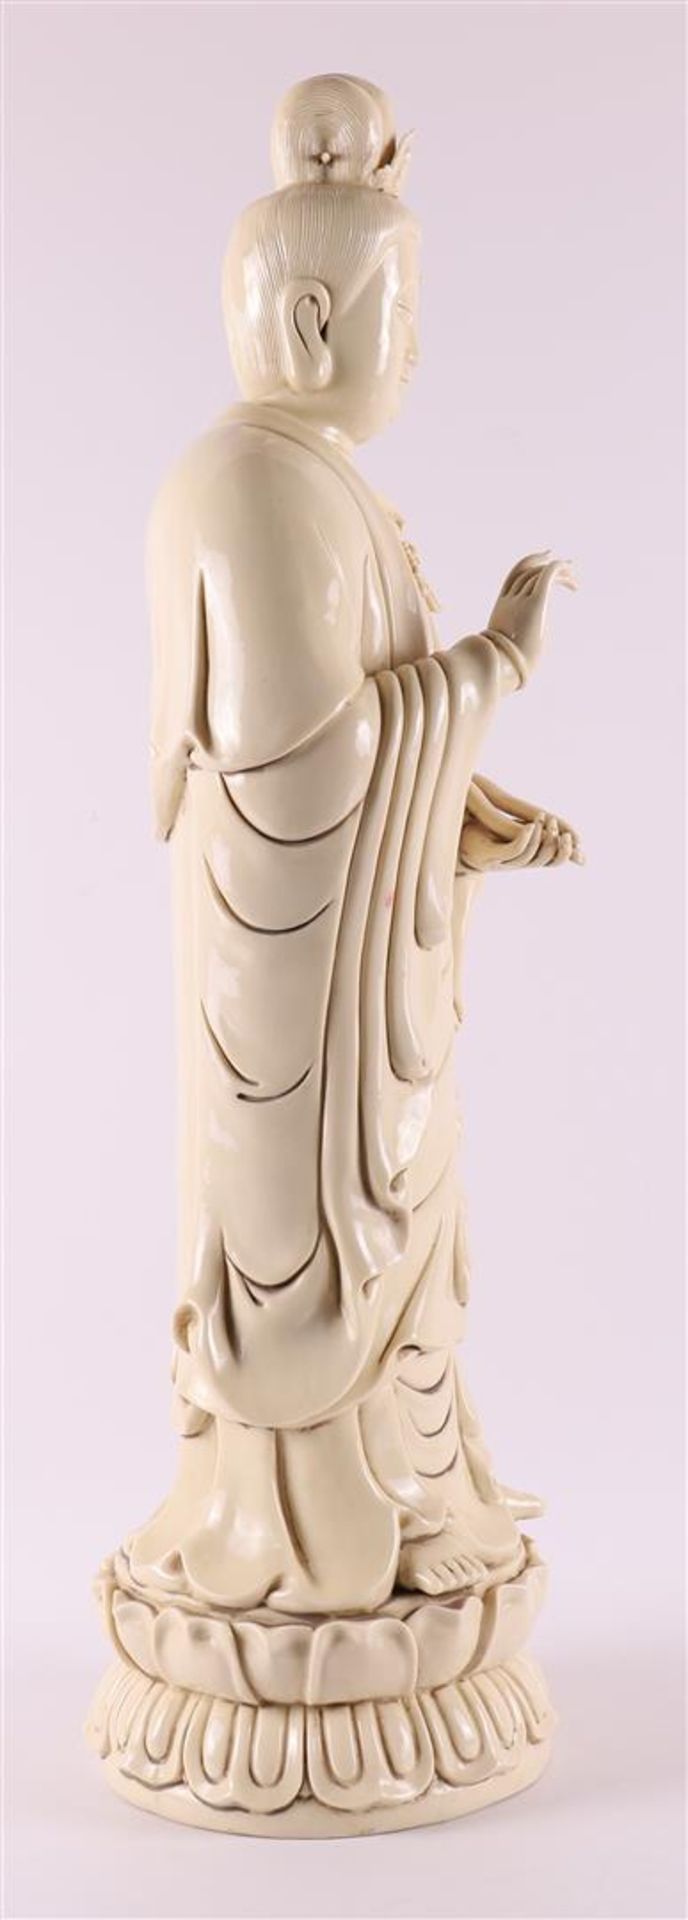 A white Chinese Kwan Yin standing on a lotus crown, China, 20th century. - Image 13 of 15